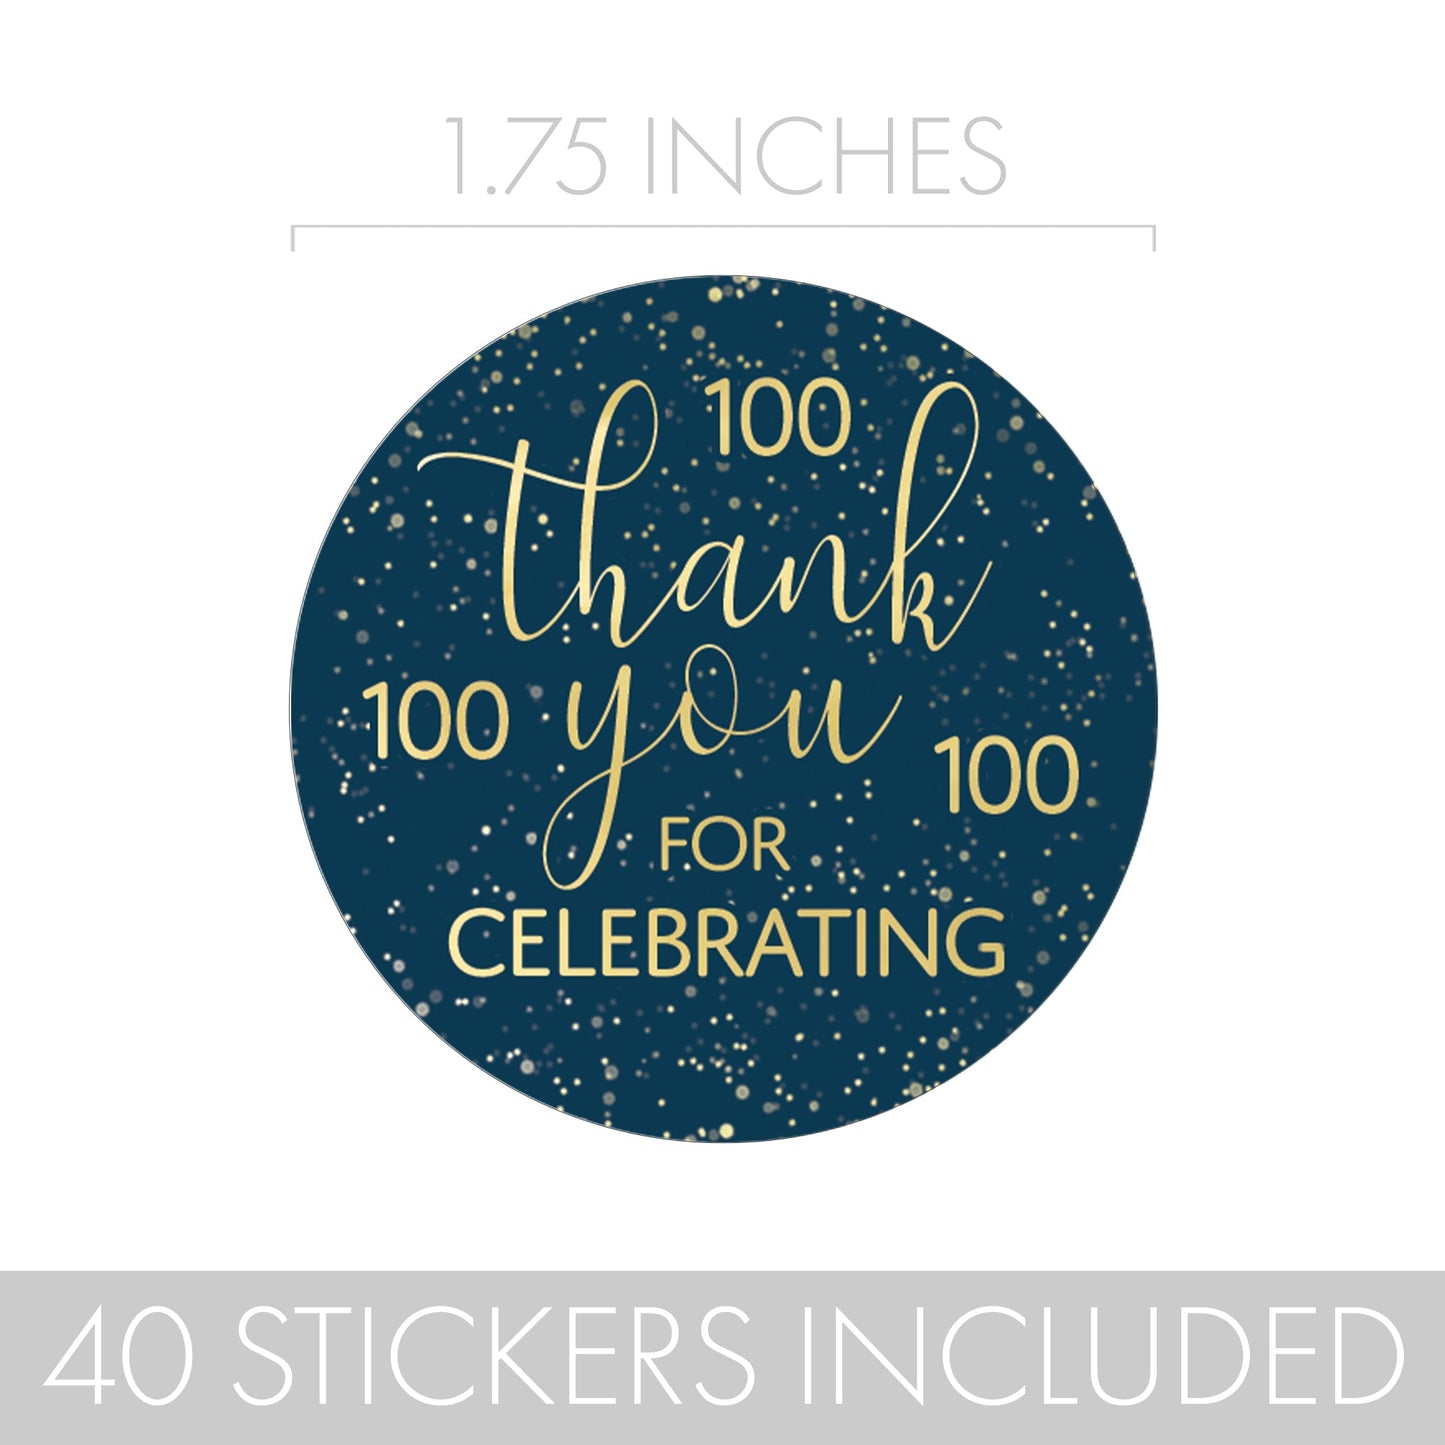 Circular thank you stickers in navy blue and gold for 100th birthday